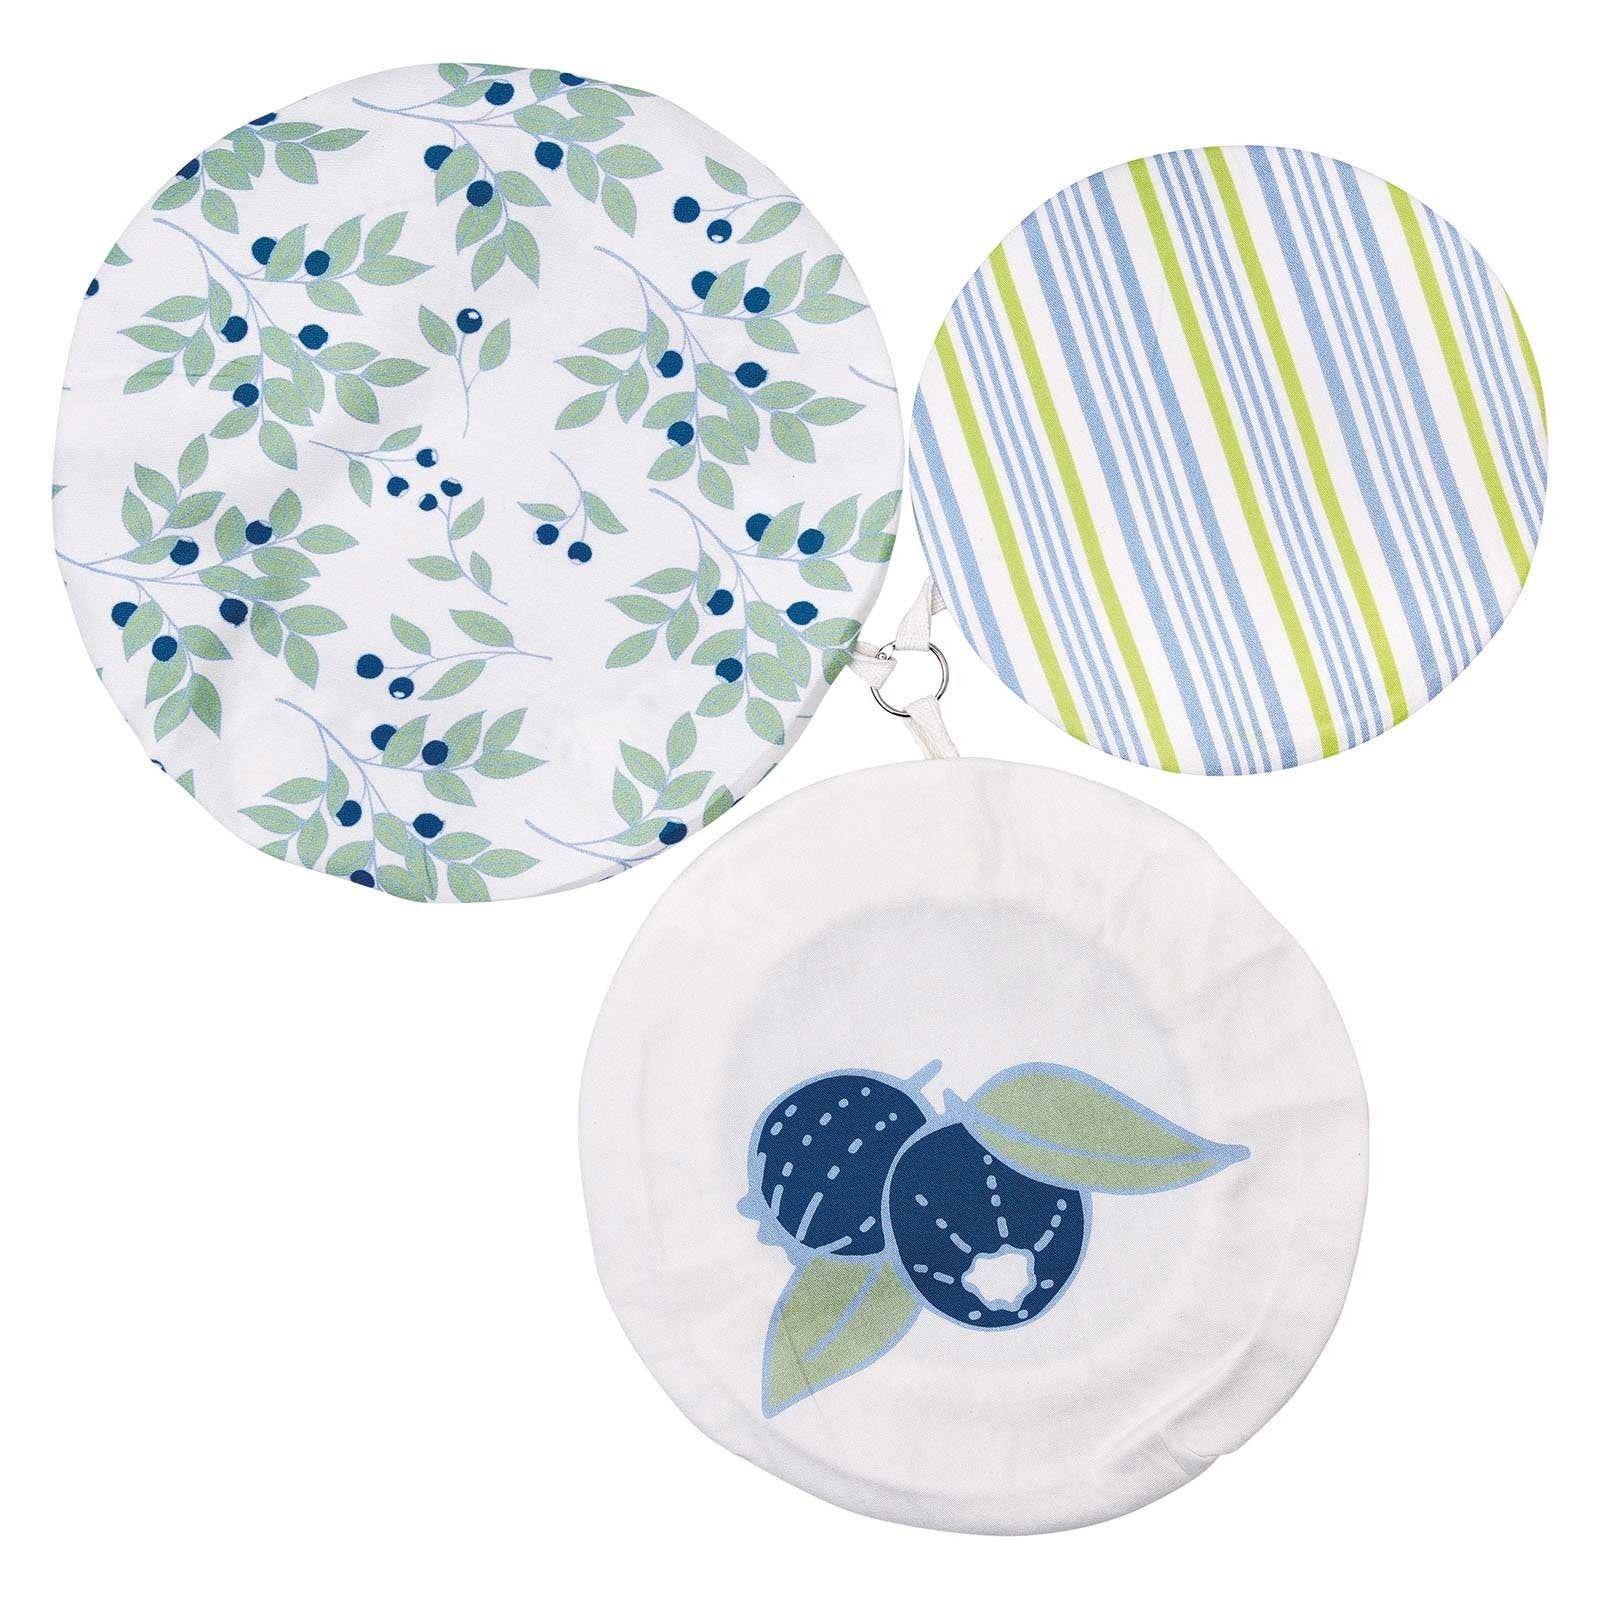 Blueberries blu Kitchen Food Storage Covers (Set of 3 ) Eco Dish Cover - rockflowerpaper